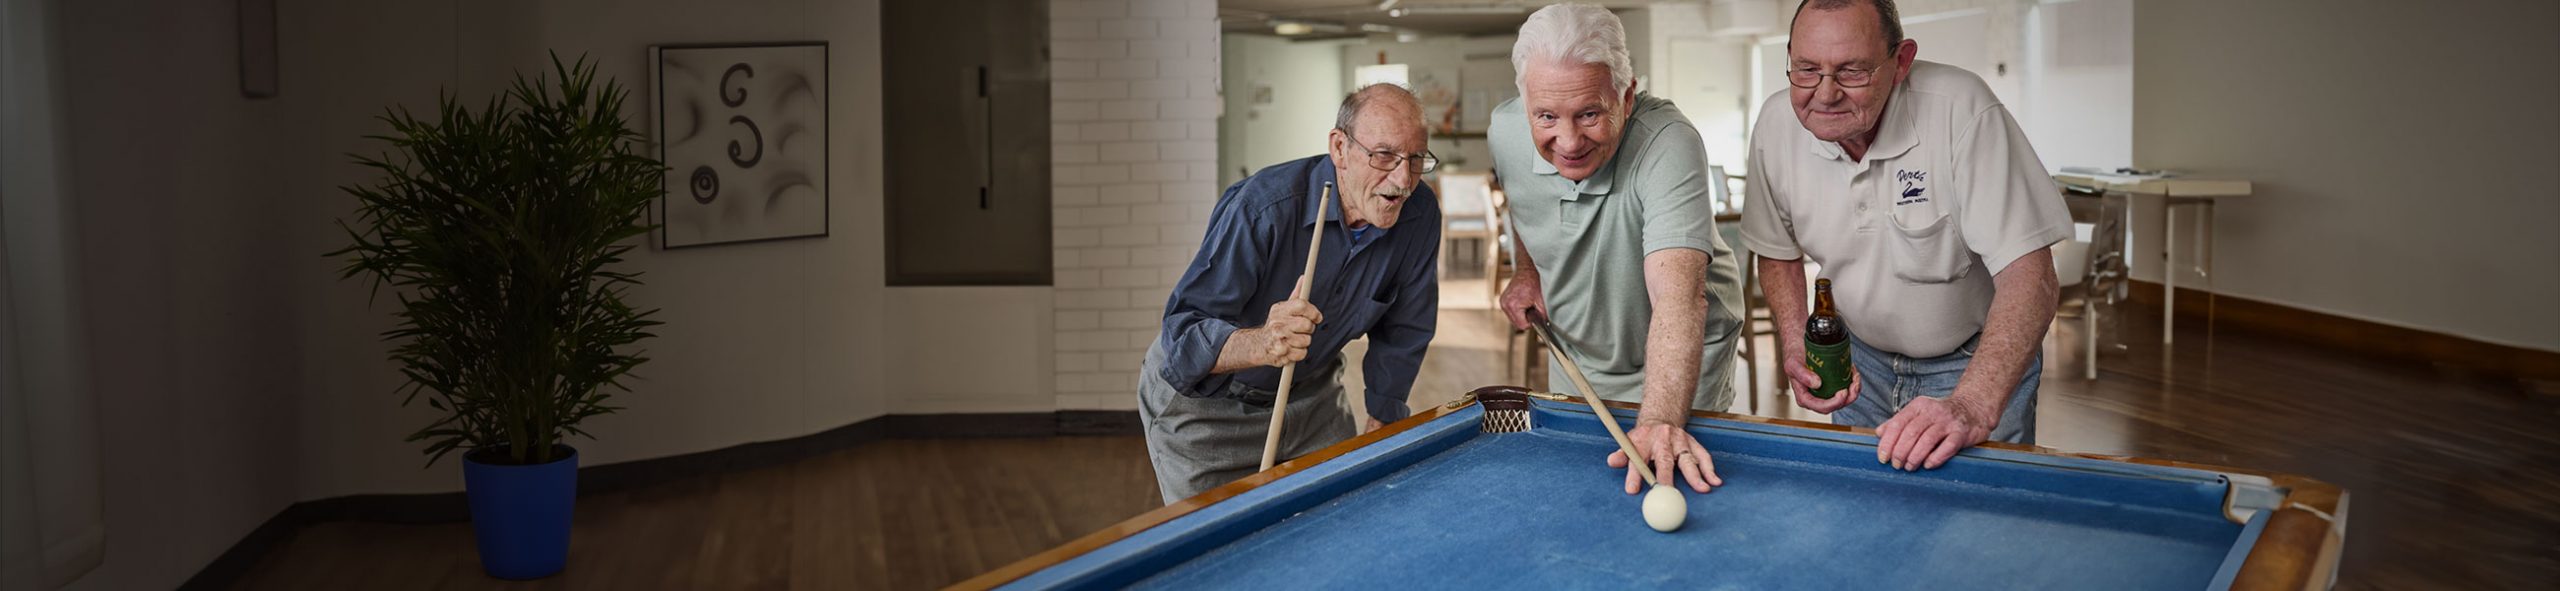 Independent units residents playing pool